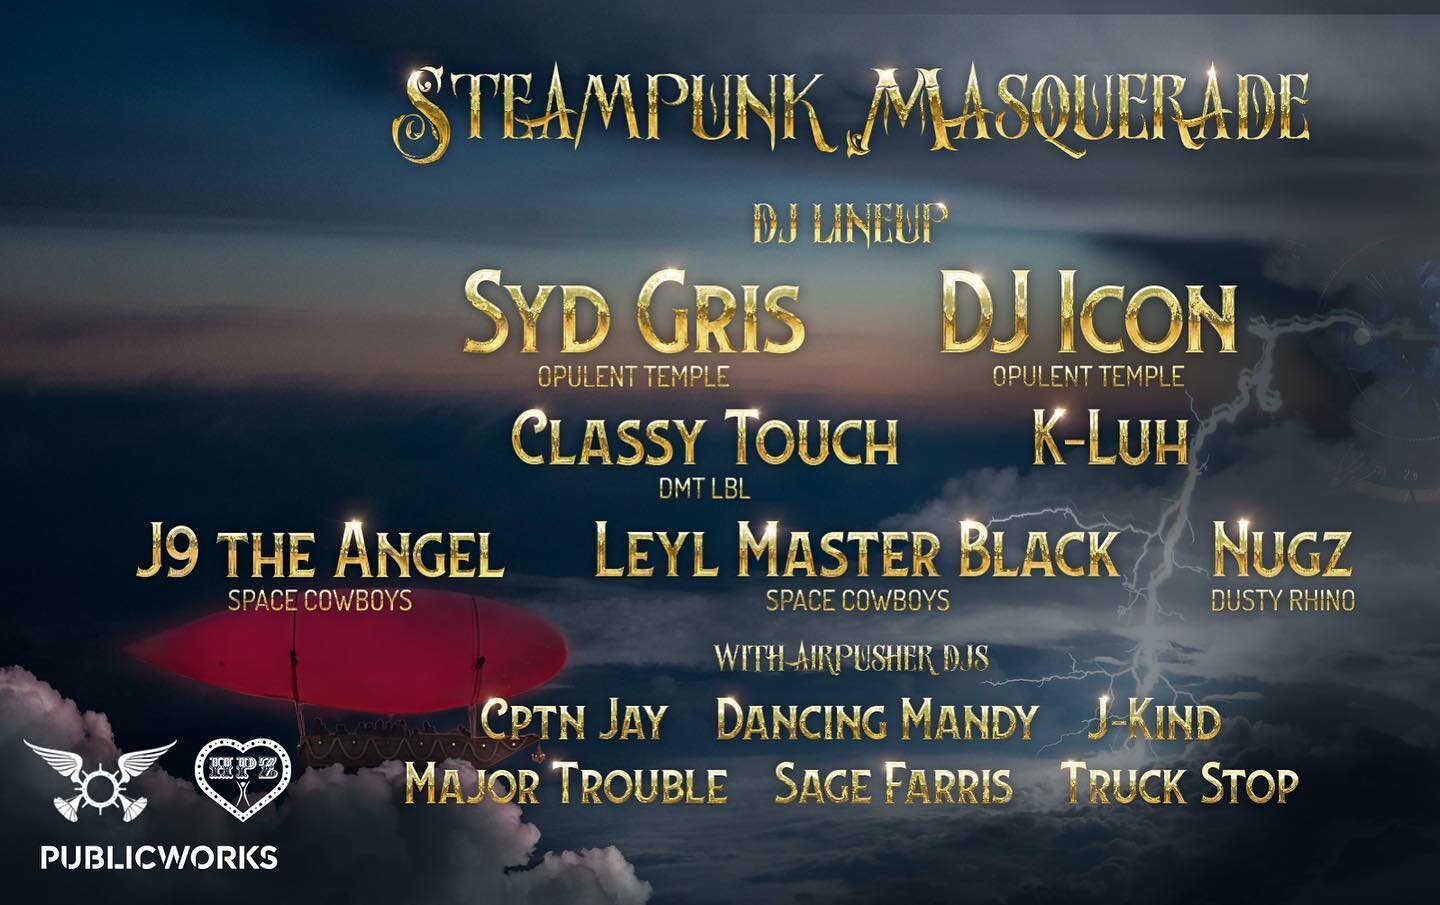 ❤️&zwj;🔥 !!! LINEUP ALERT !!! ❤️&zwj;🔥

We're so excited to share phase one of our lineup for this year's Steampunk Masquerade! Dust off your corsets and top hats and join us for the best music, art, and community the SF Burner community has to off